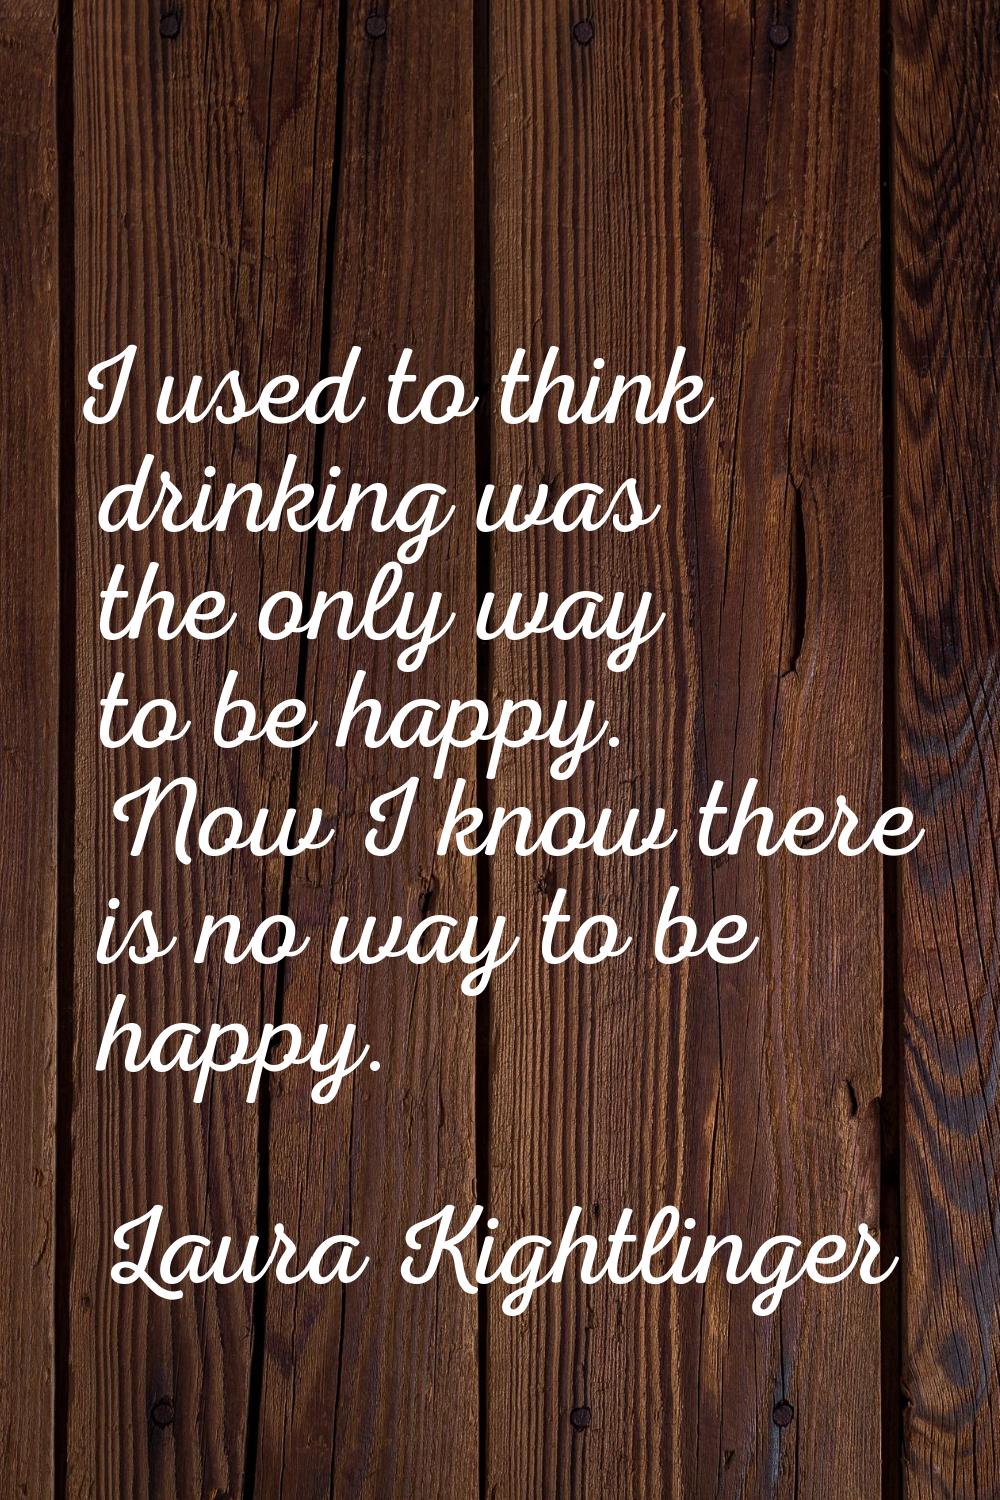 I used to think drinking was the only way to be happy. Now I know there is no way to be happy.